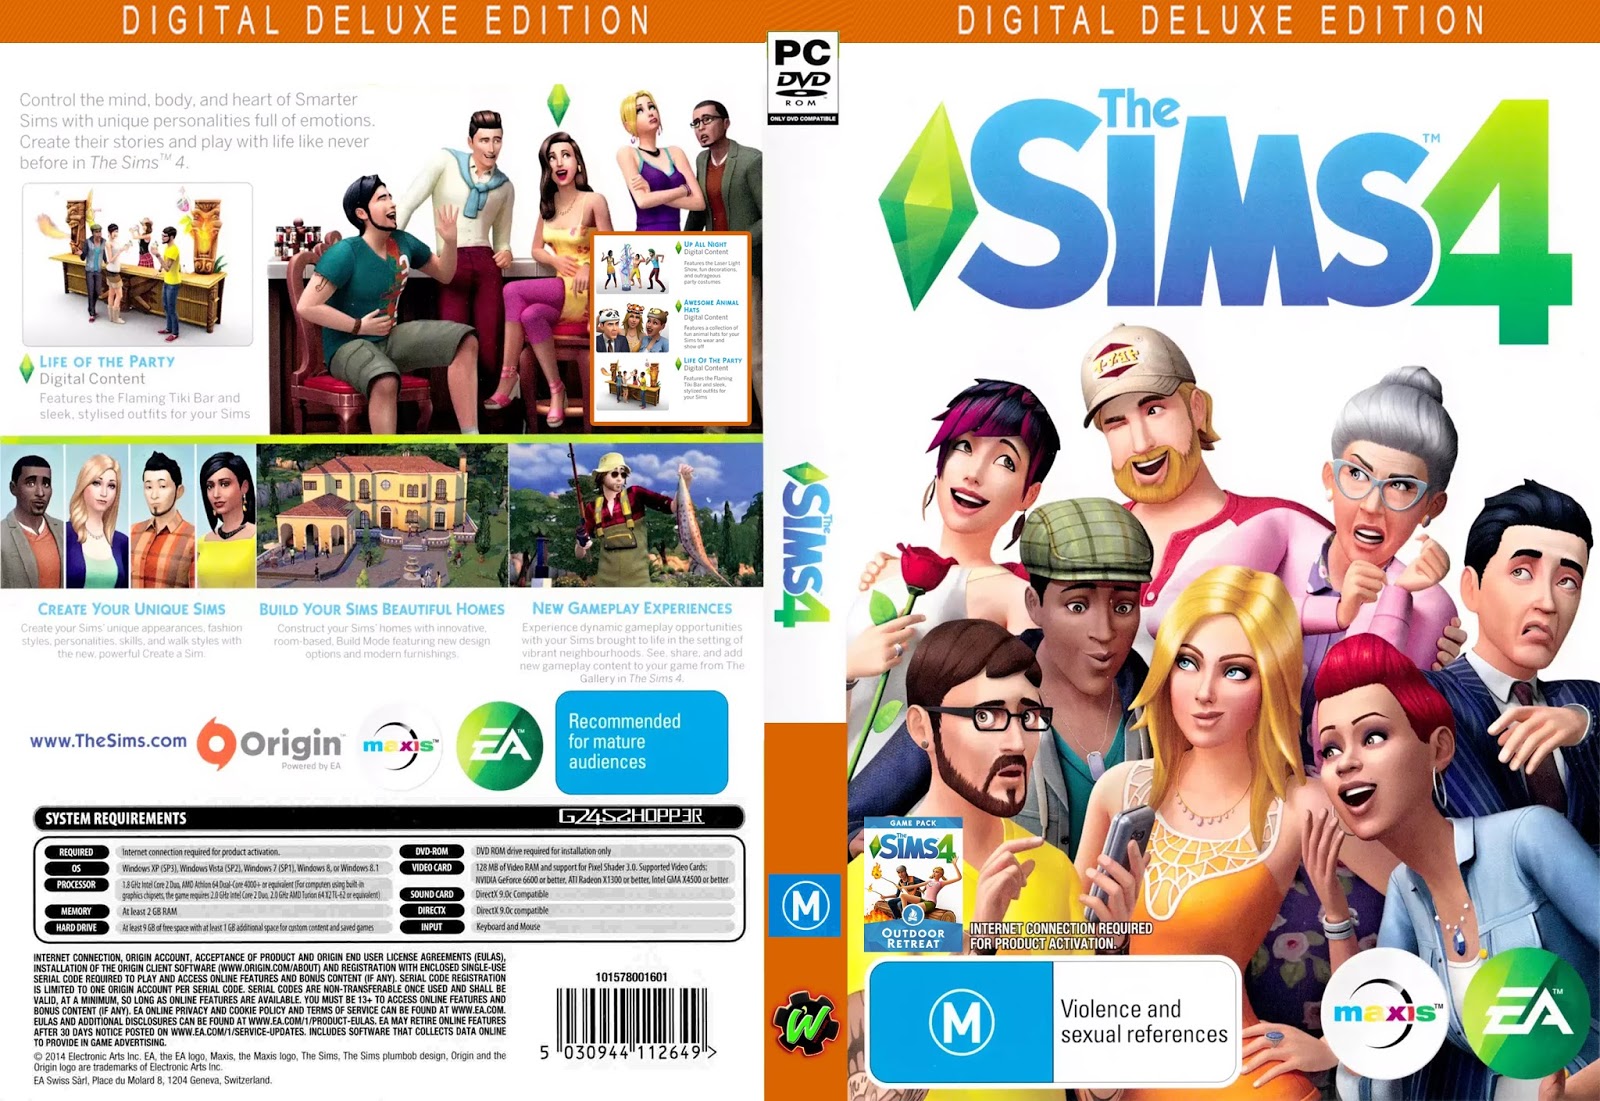 The sims deluxe edition download torrent